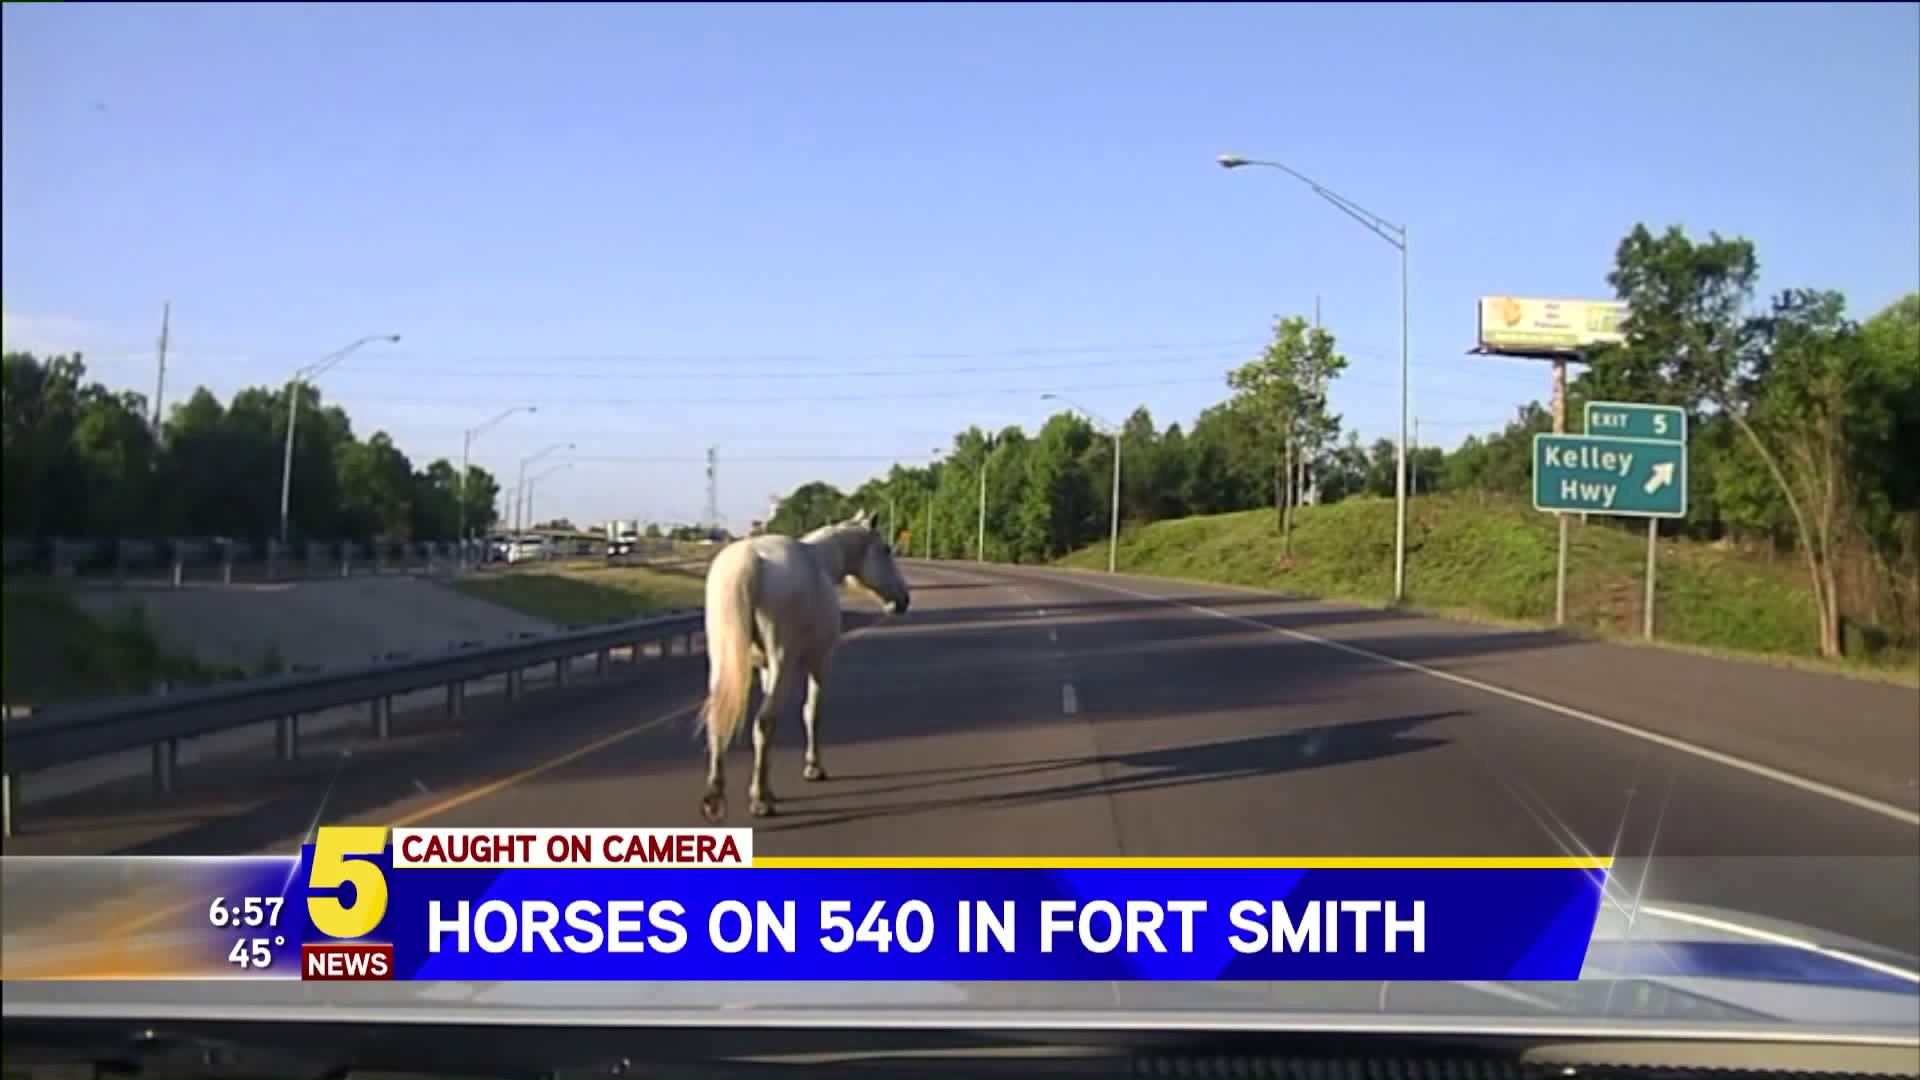 Horses on 540 in Fort Smith